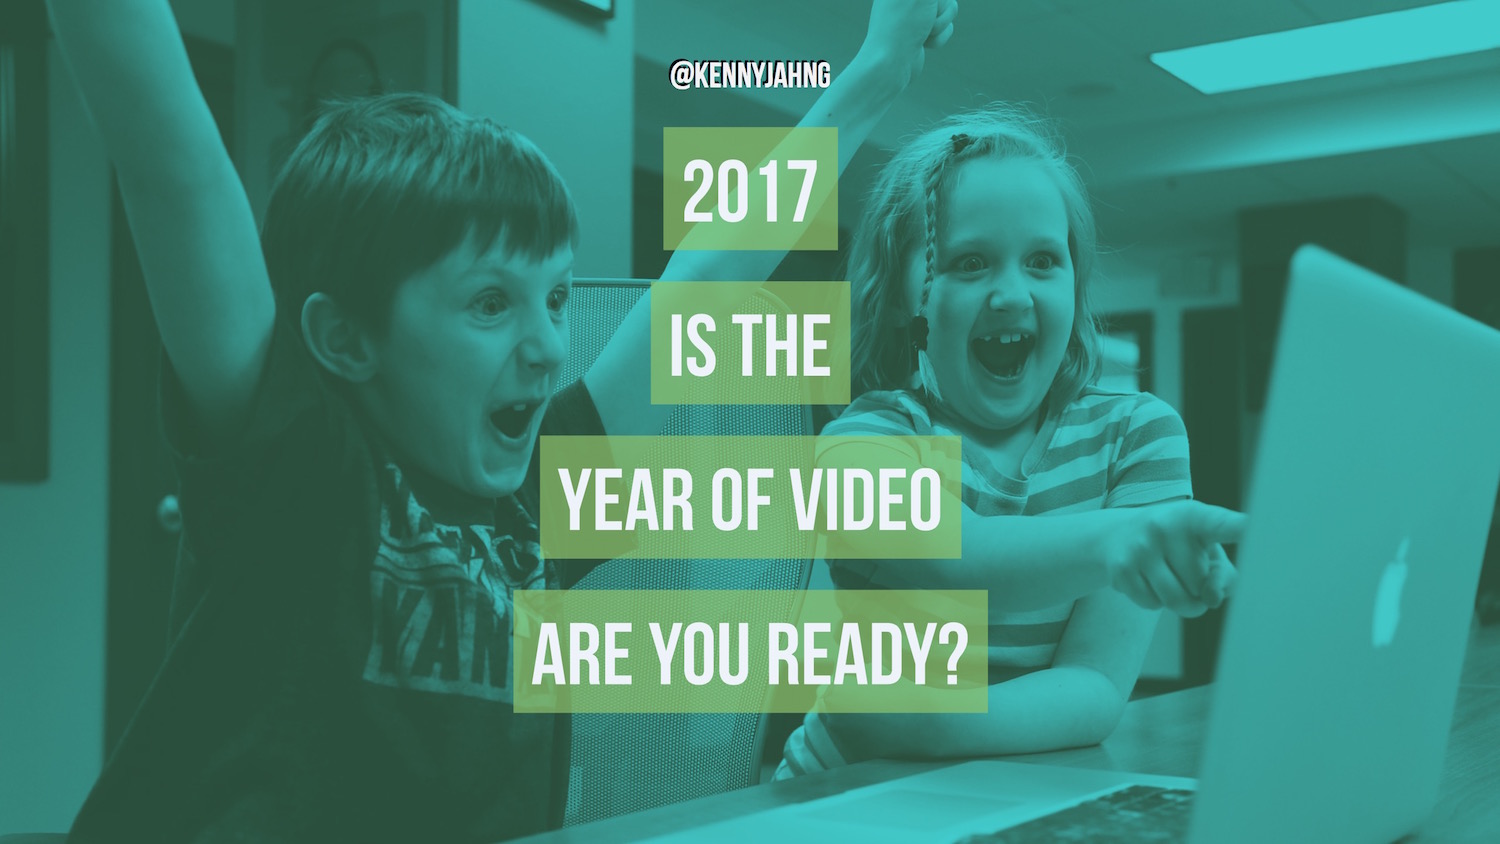 2017 Is The Year Of Video. But Are You Ready?